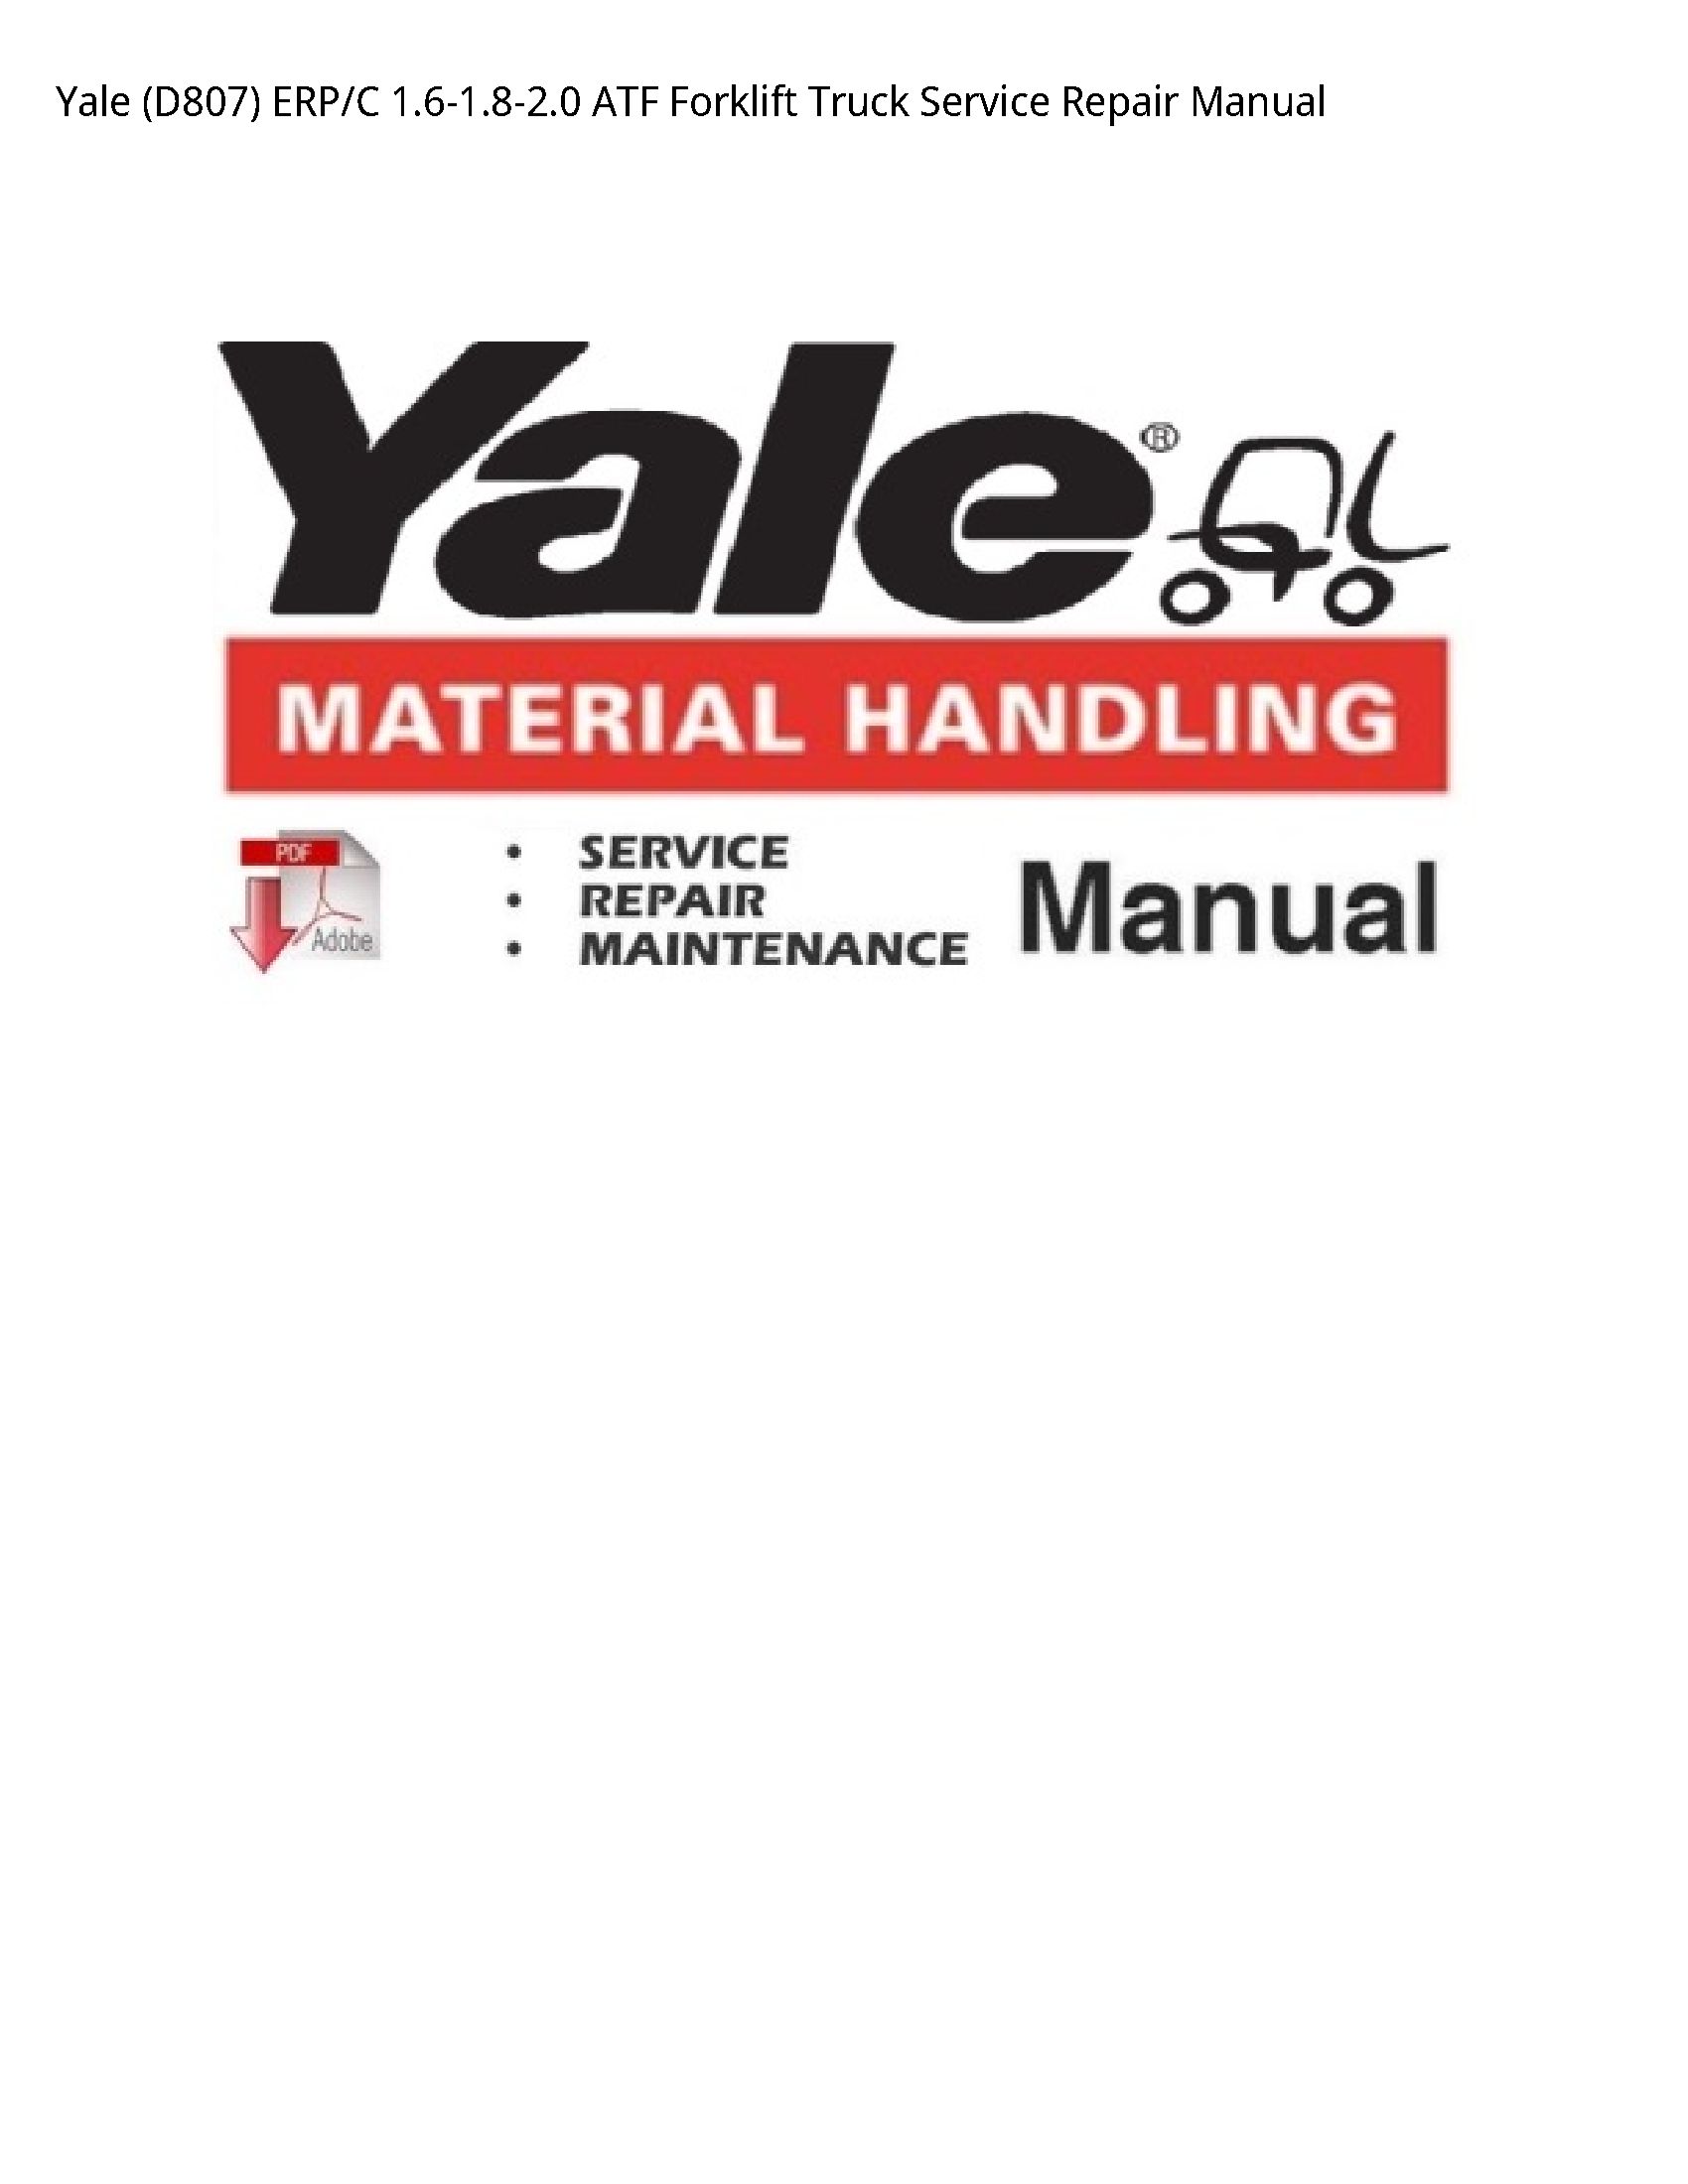 Yale (D807) ERP/C ATF Forklift Truck manual